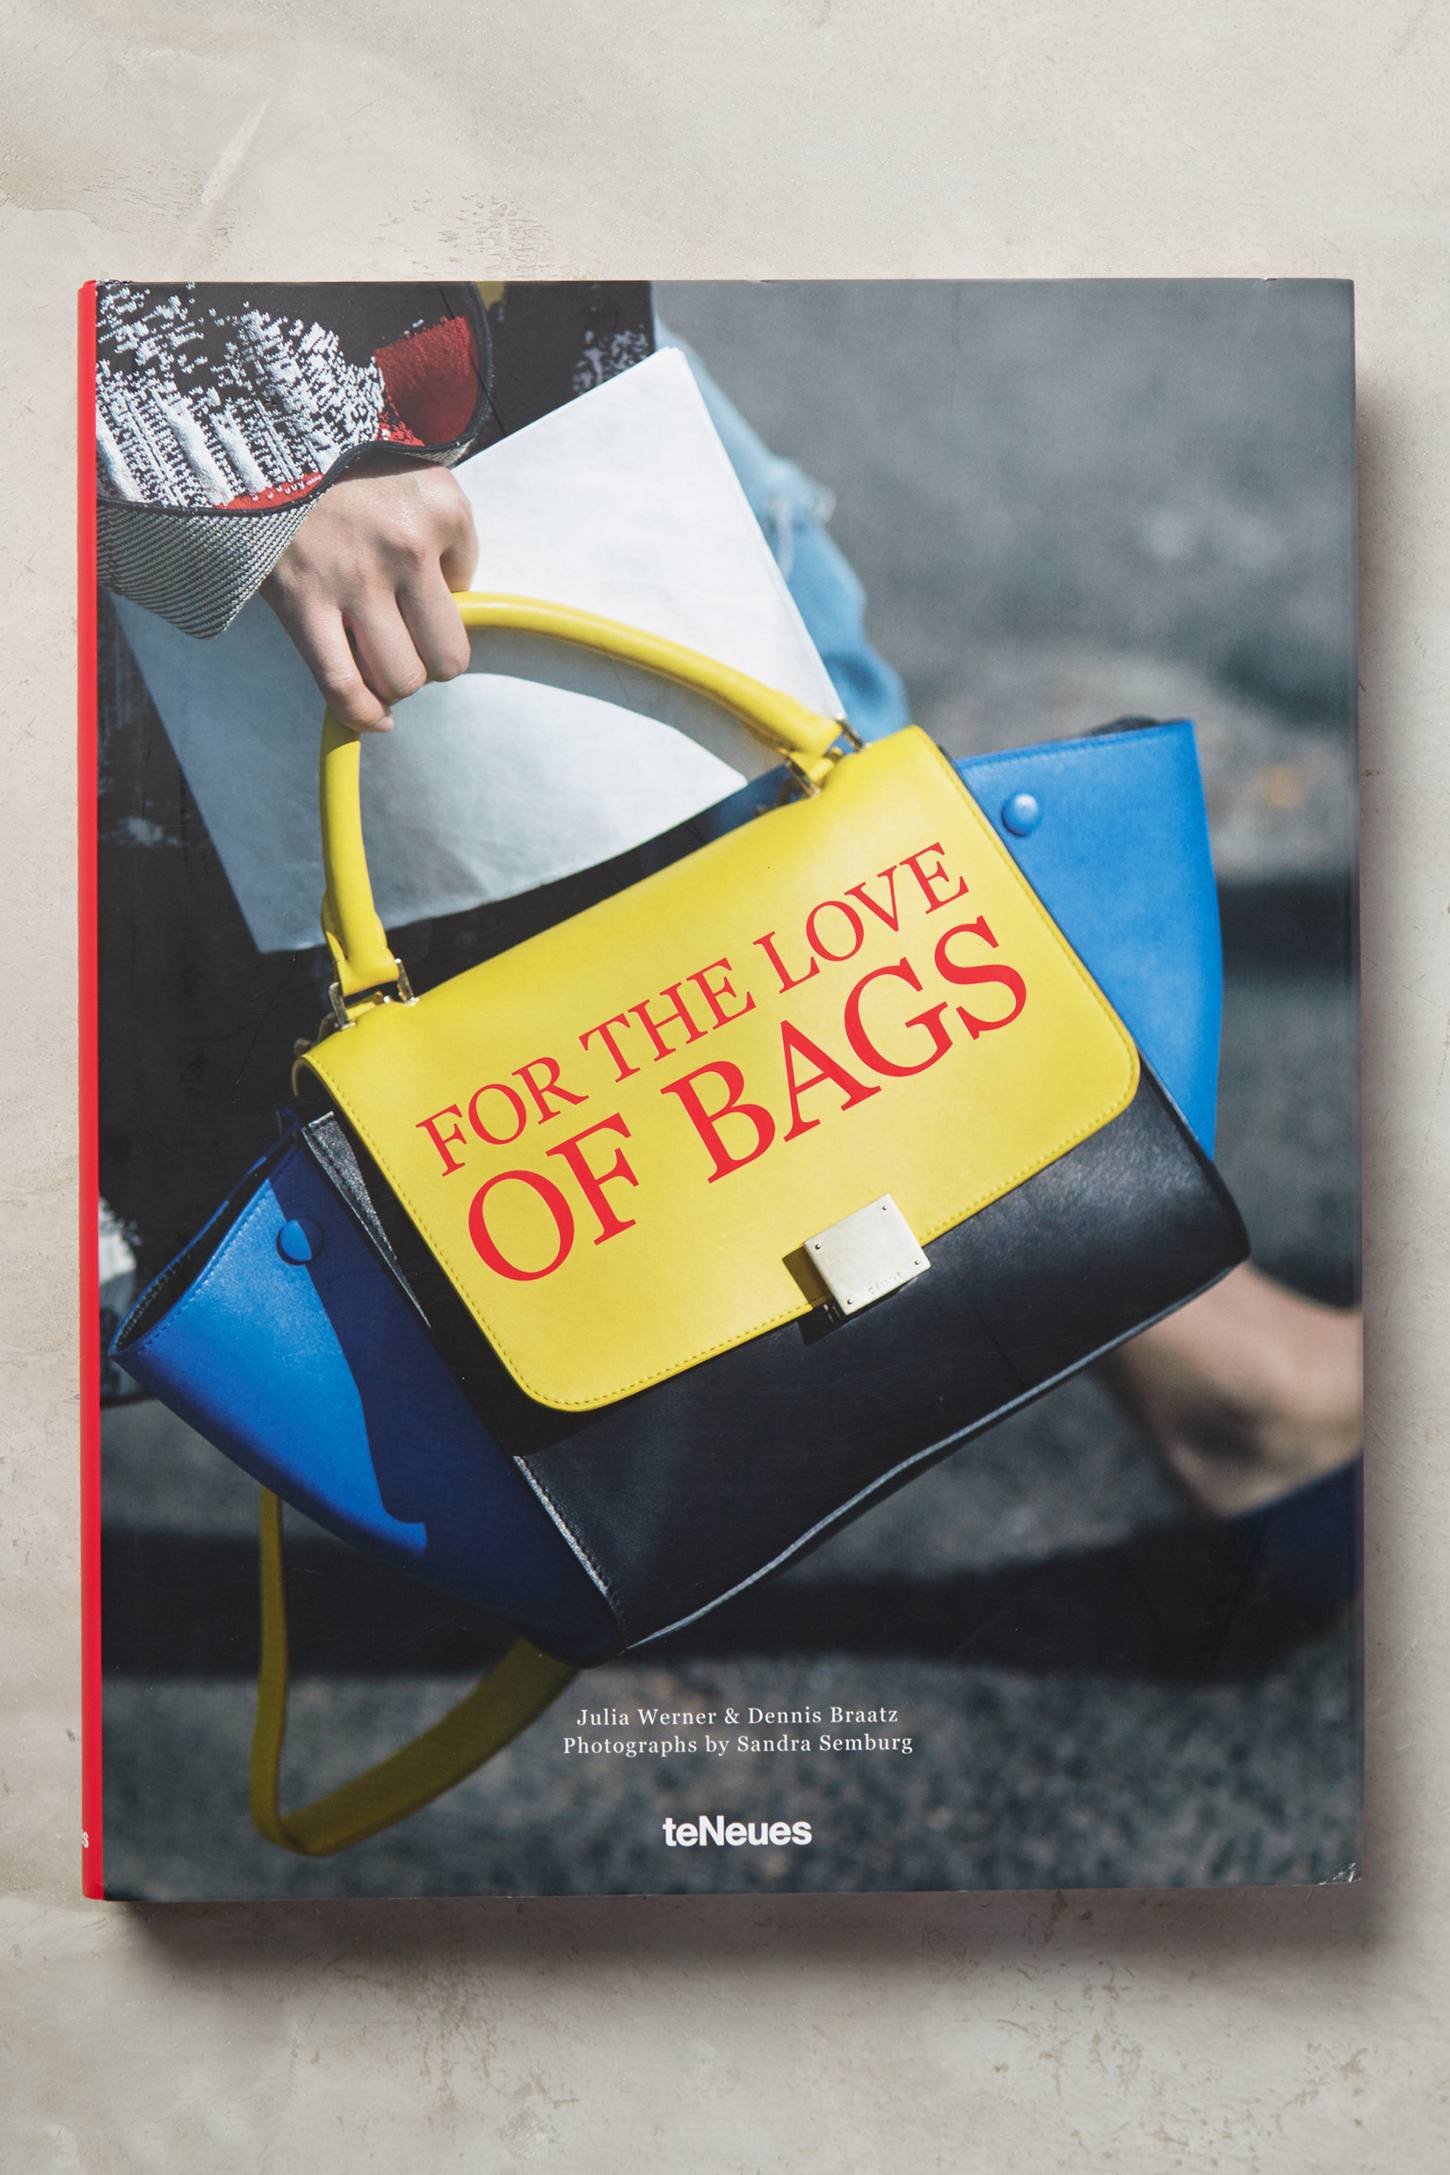 For The Love Of Bags